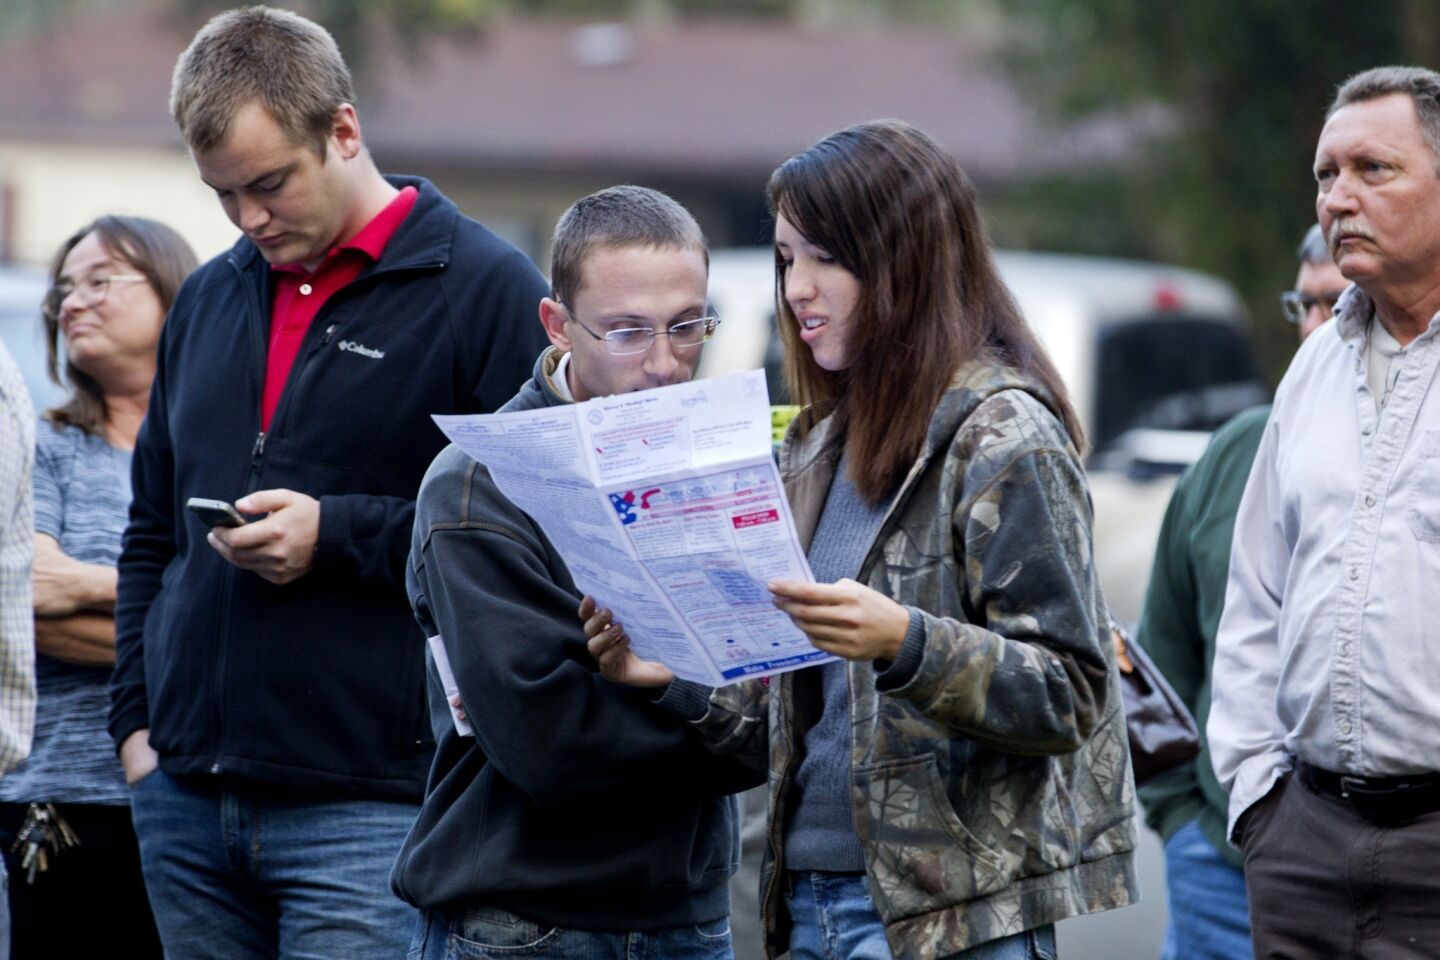 Robert Ceska, third from left, and Meagan Lewis look over a sample ballot just after dawn as people line up at the County Polling House in Crawfordville, Fla.